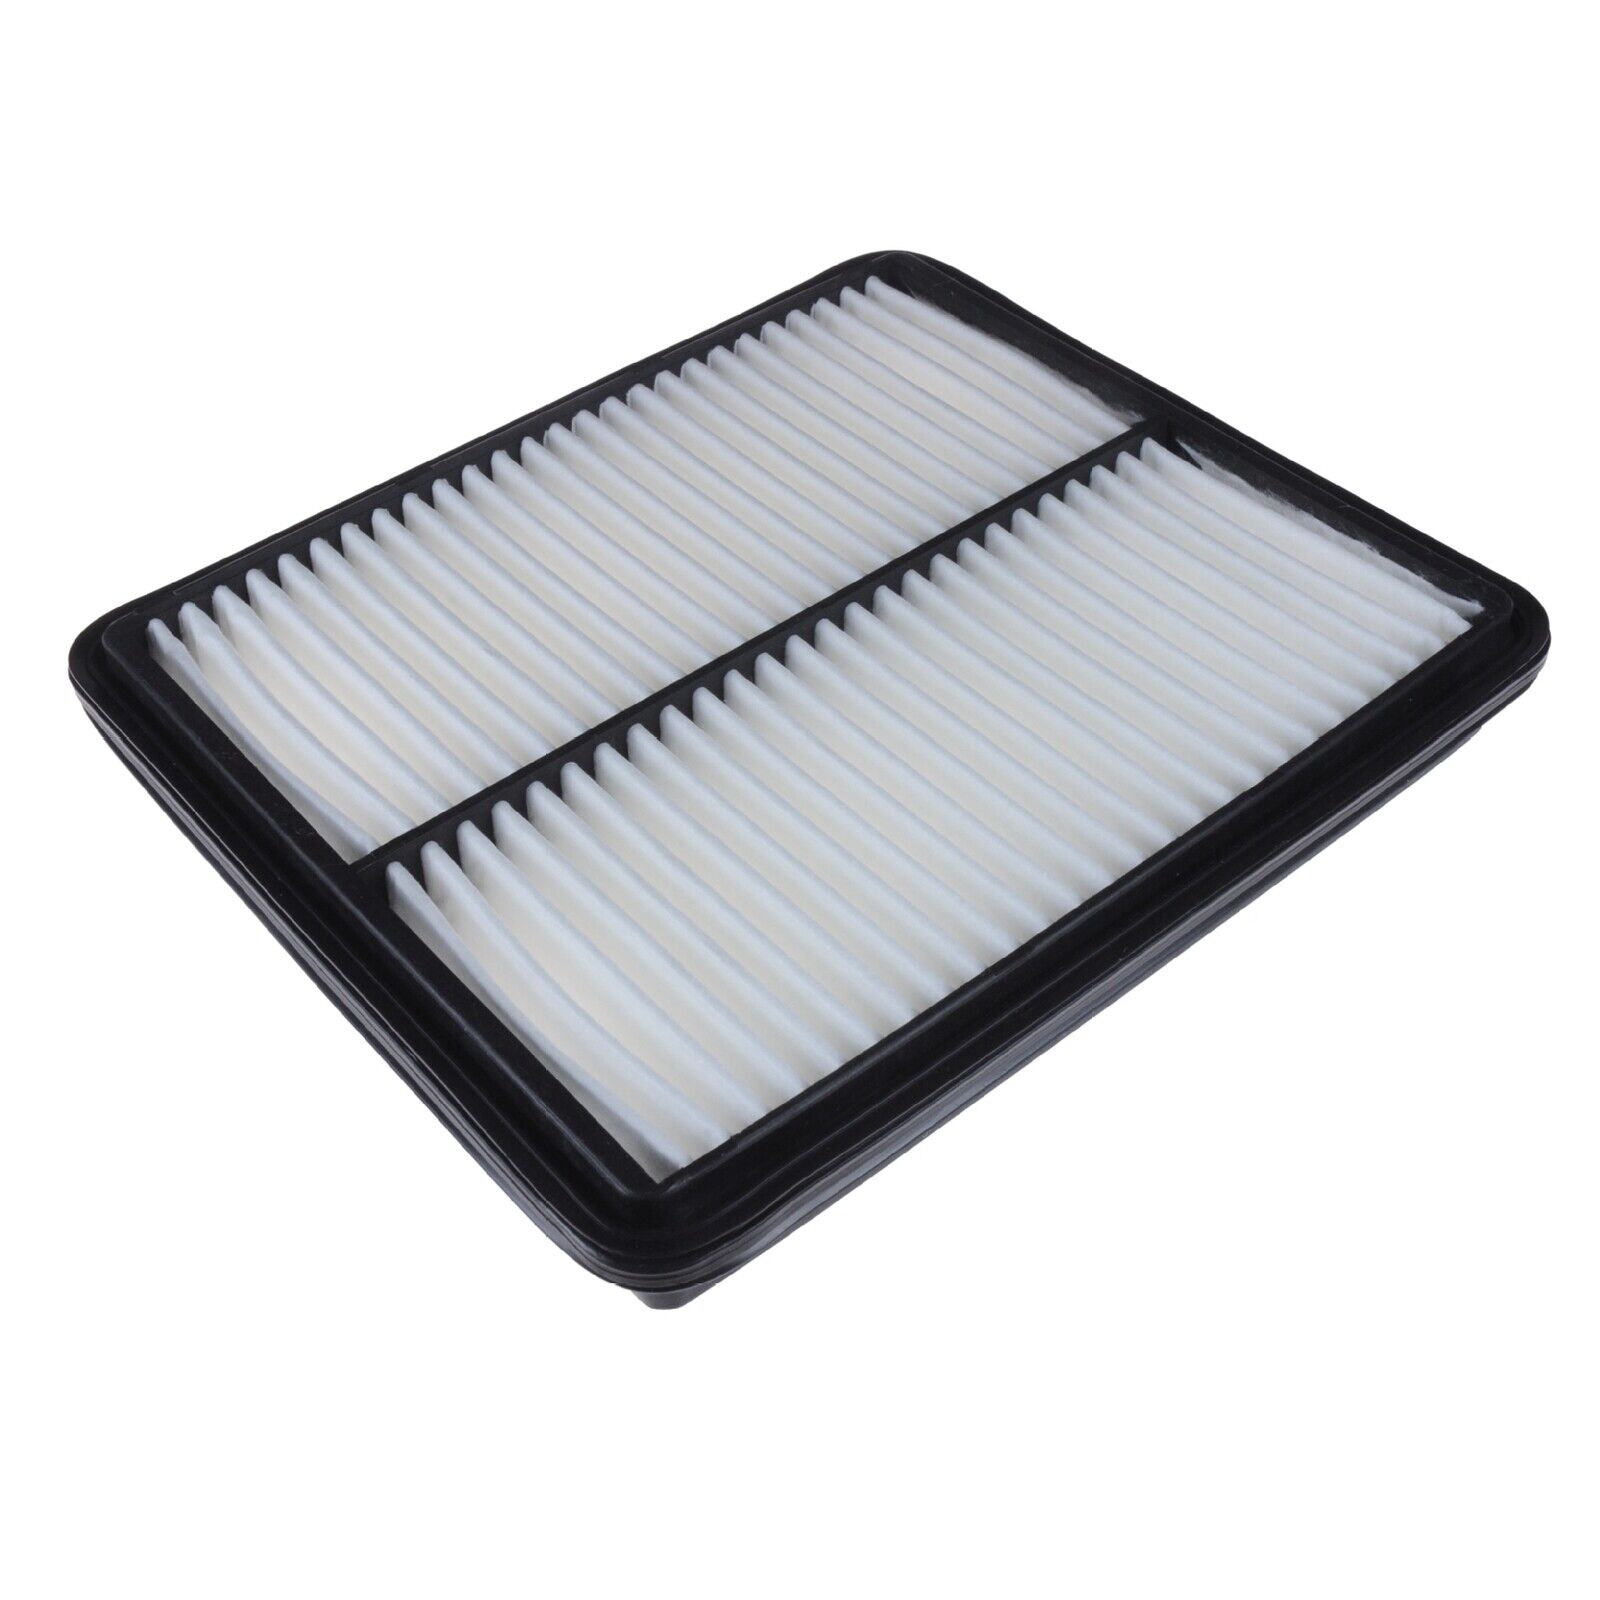 Blue Print Air Filter ADG02221 - High Quality OE Replacement For Daewoo Leganza